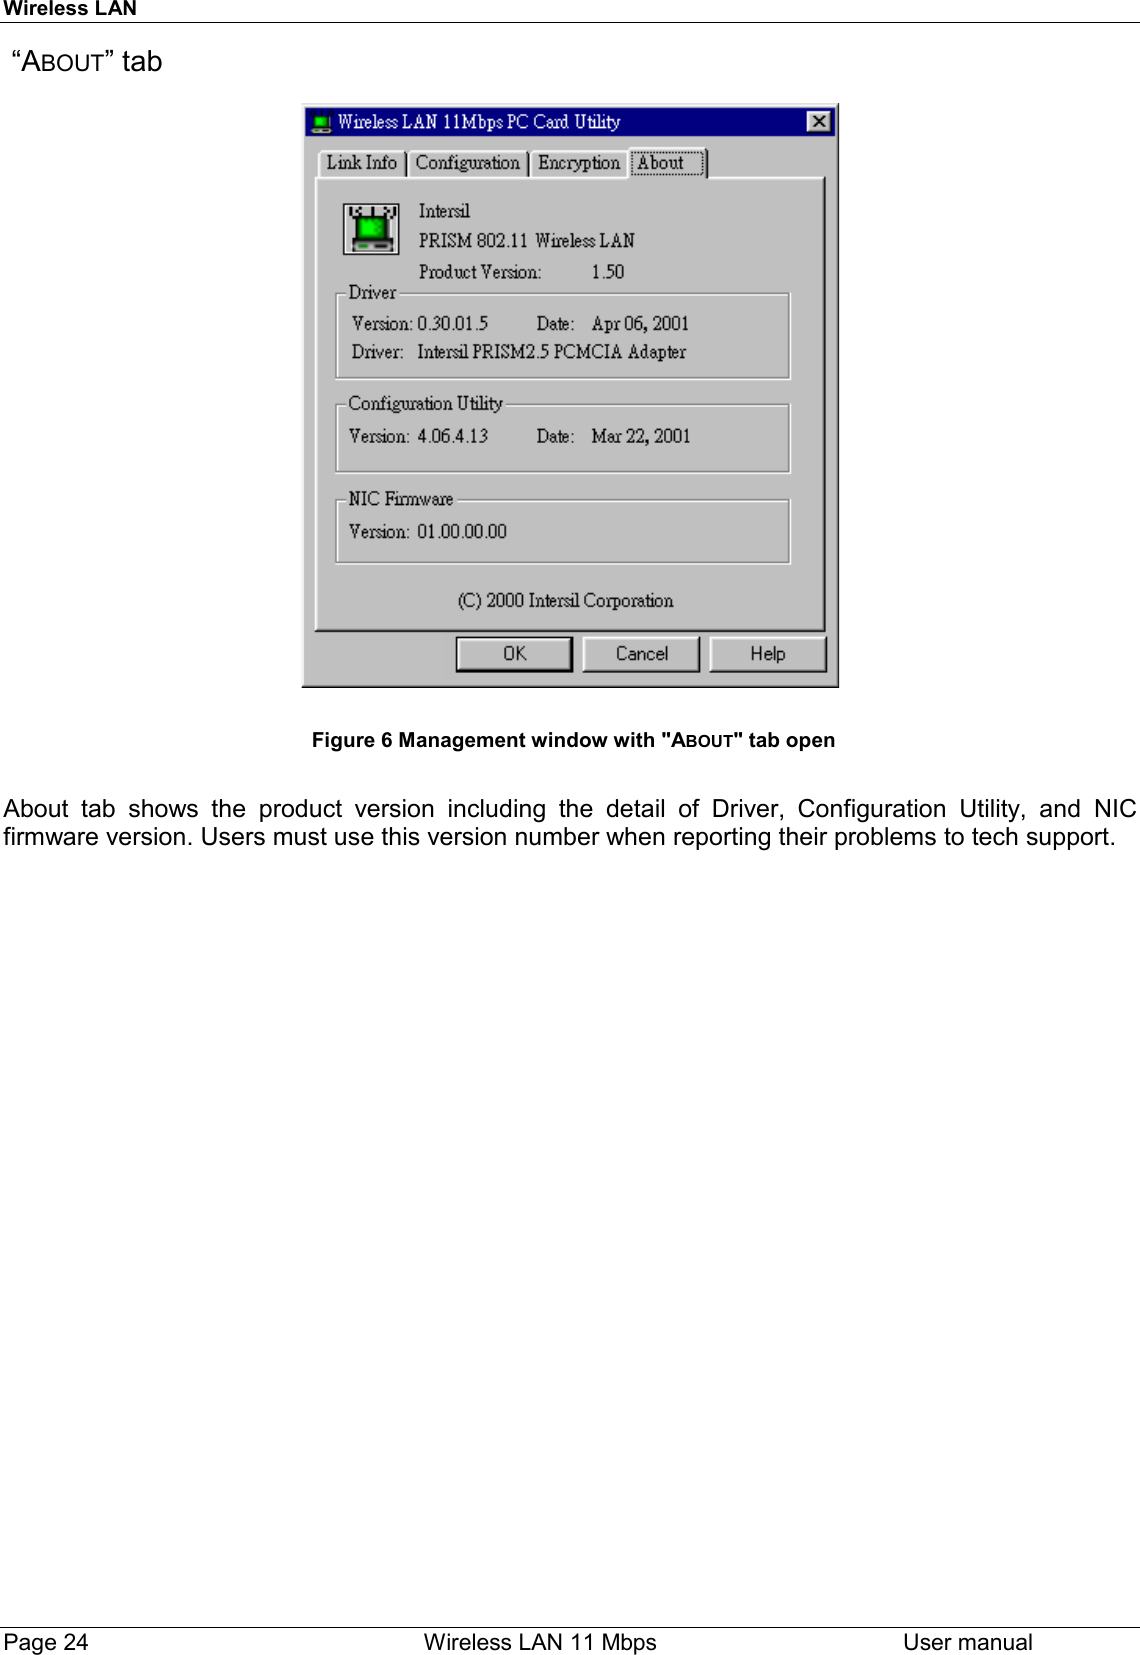 Wireless LANPage 24    Wireless LAN 11 Mbps User manual “ABOUT” tabFigure 6 Management window with &quot;ABOUT&quot; tab openAbout tab shows the product version including the detail of Driver, Configuration Utility, and NICfirmware version. Users must use this version number when reporting their problems to tech support.